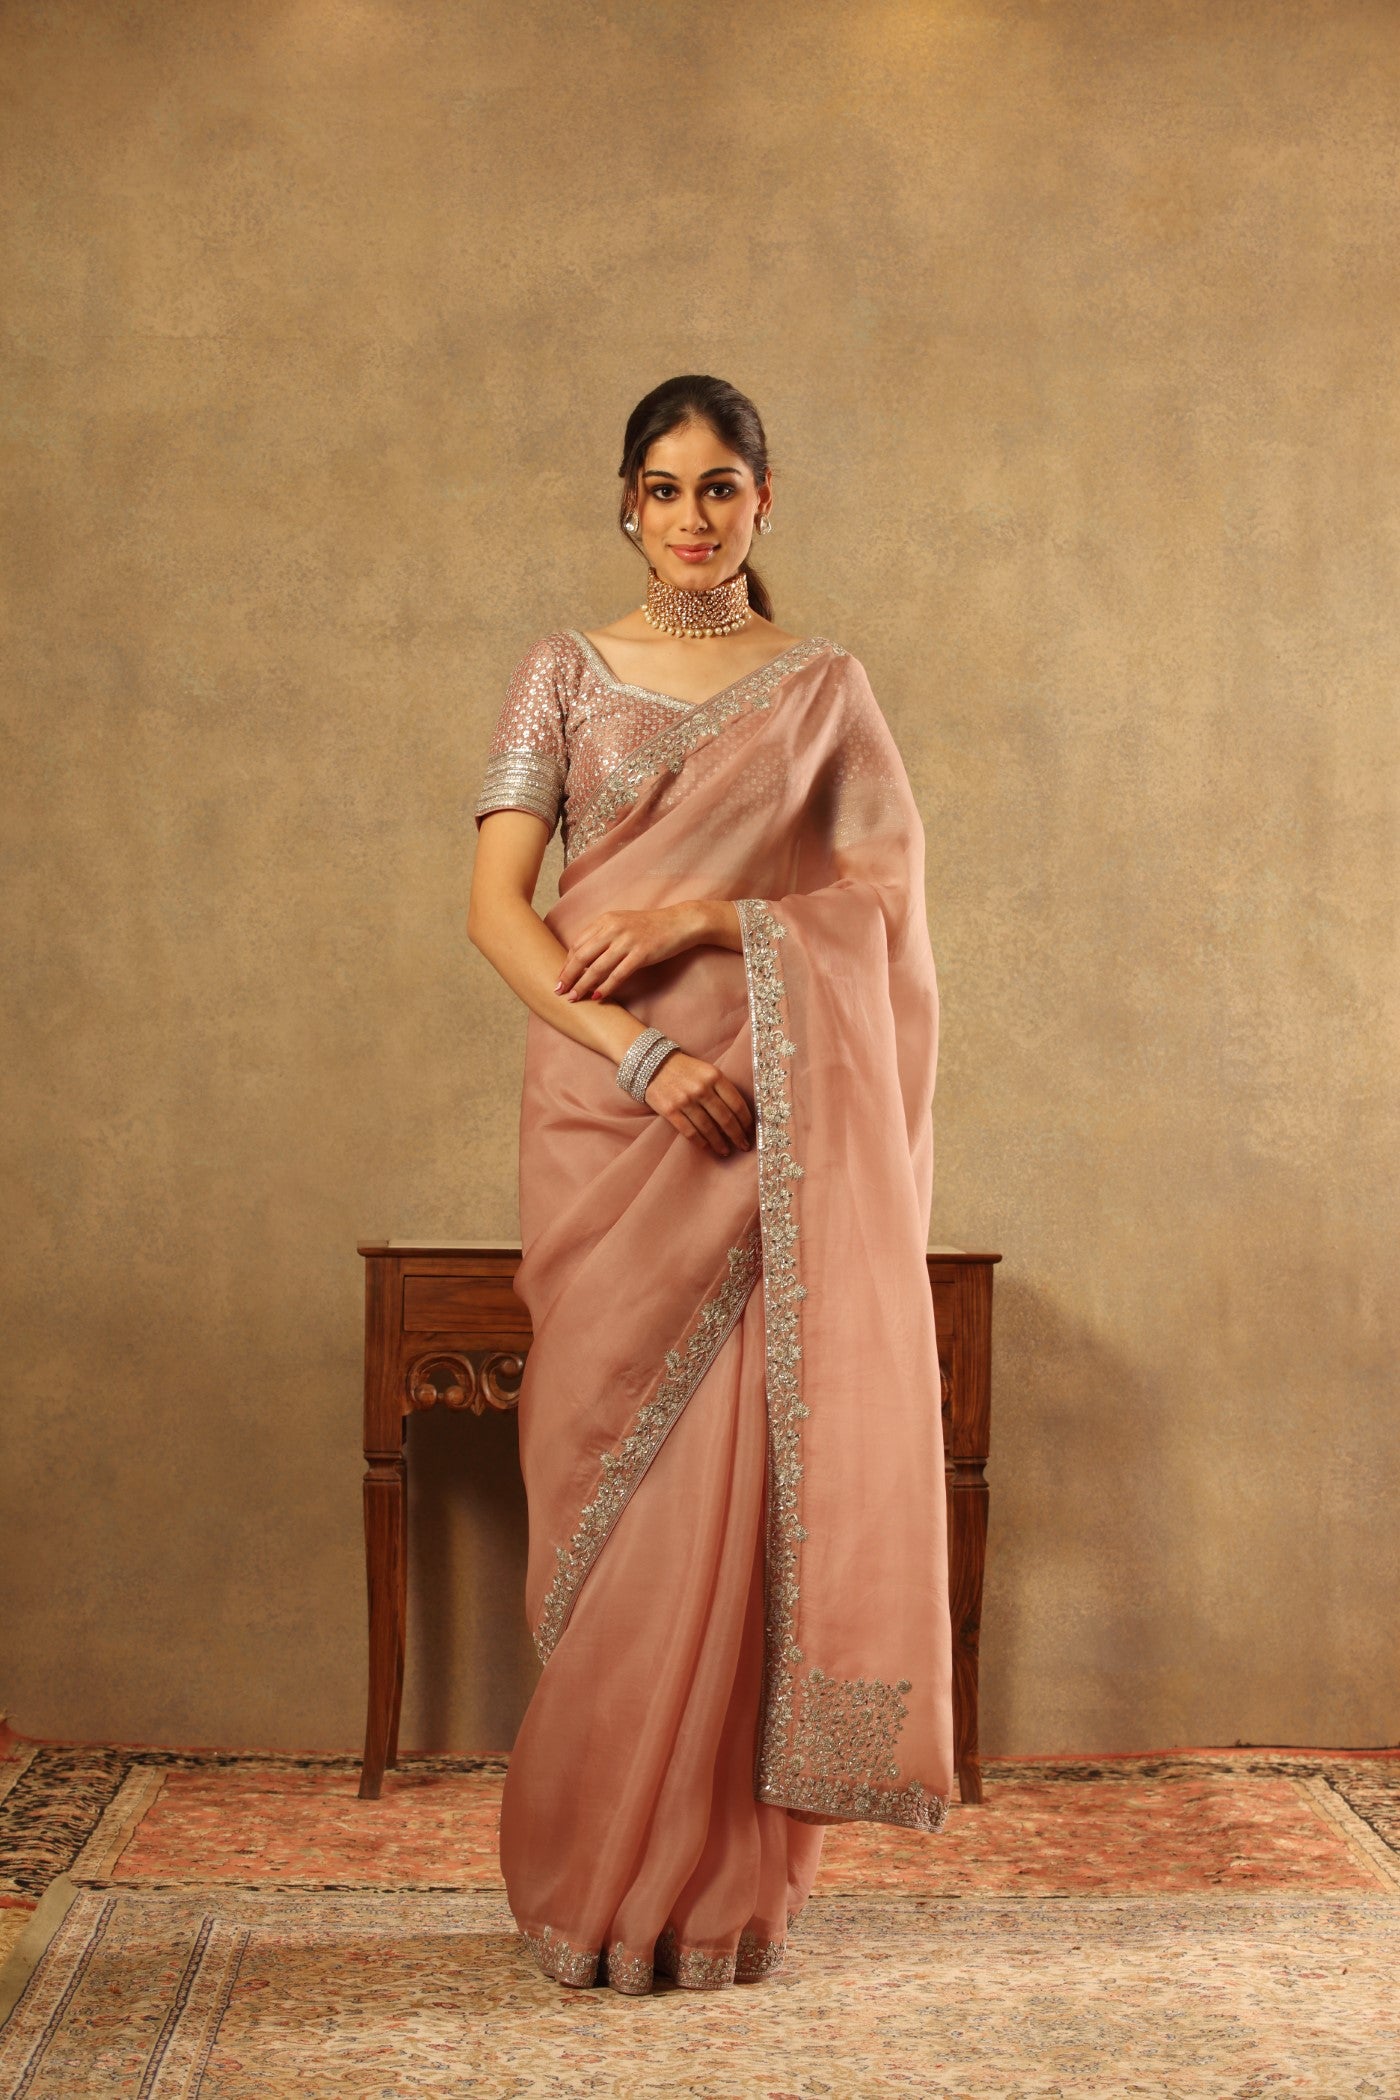 Hand Embroidered Dusty Pastel Pink Pure Silk Organza Saree Blouse Set